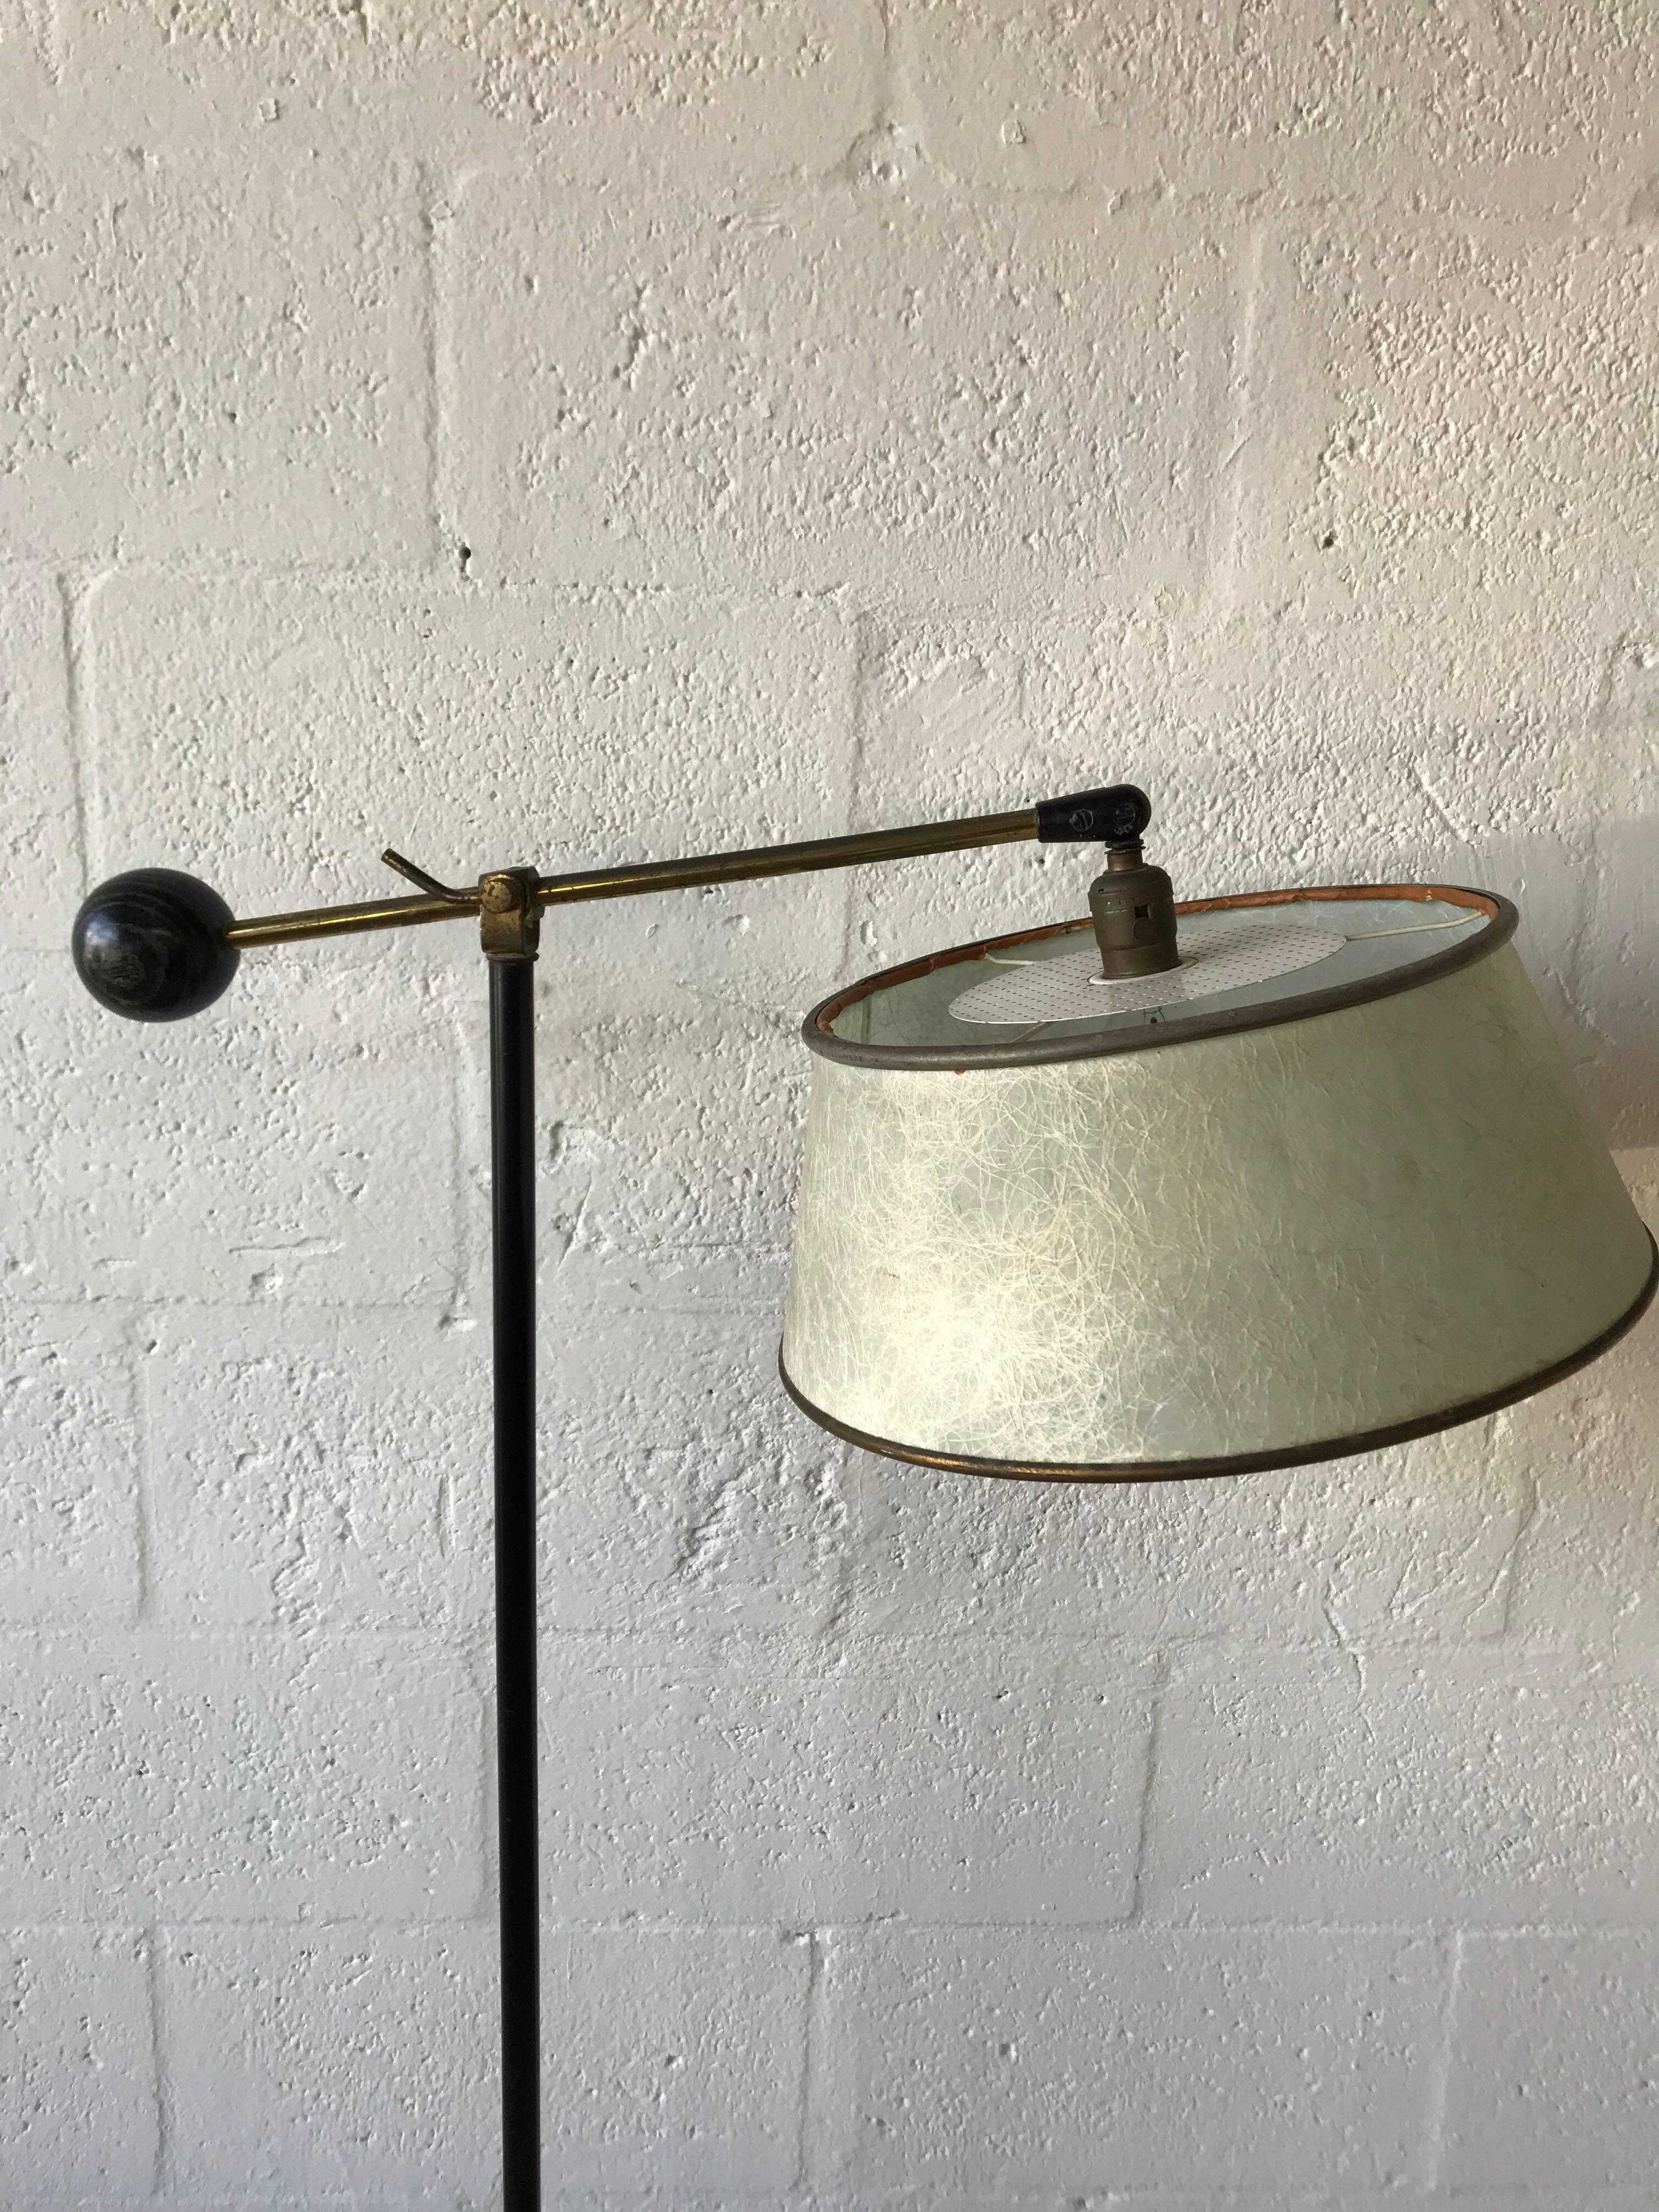 Art Deco reading or floor lamp rendered in patinated brass with an adjustable arm, original fiberglass shade with perforated diffuser and a large ebonized and cerused oak ball on the opposing side.